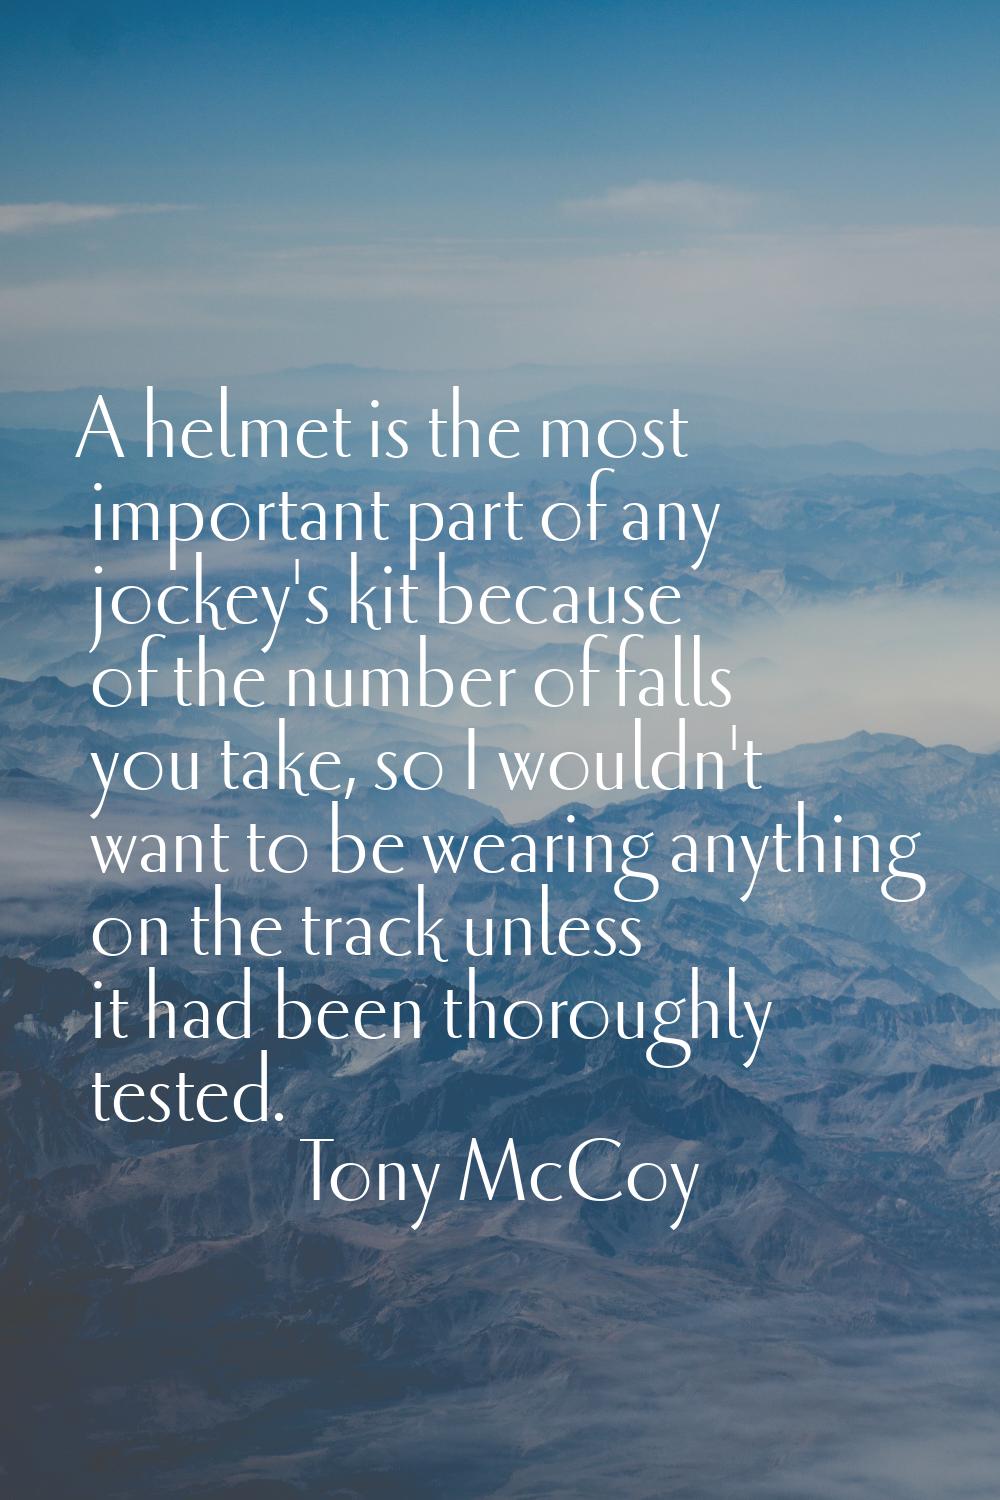 A helmet is the most important part of any jockey's kit because of the number of falls you take, so